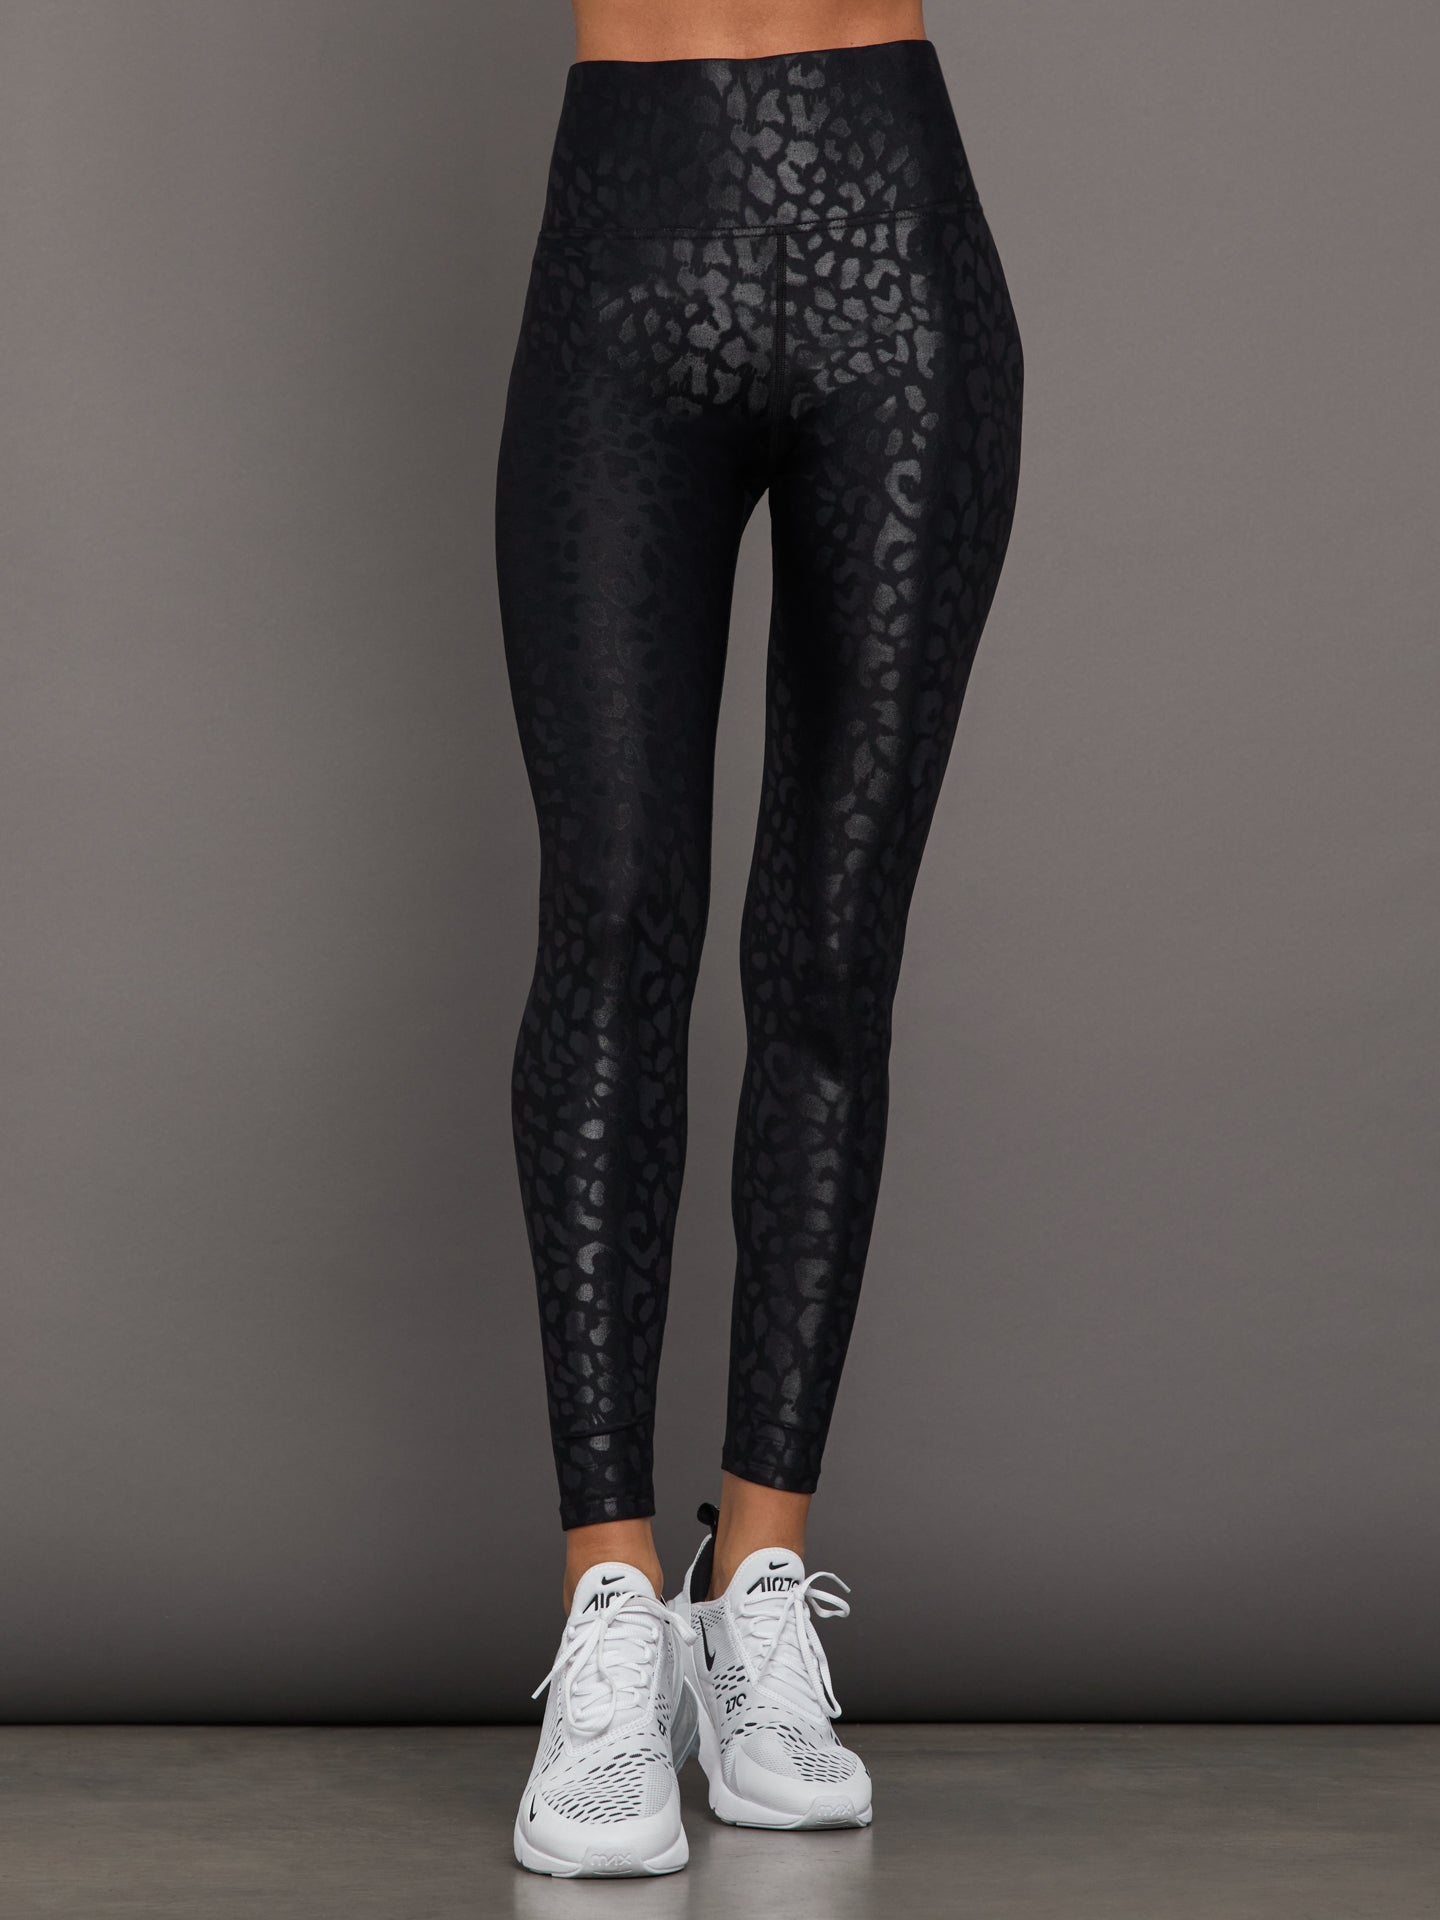 Carbon38 Animal Leopard Print High Waisted Full Length Compression